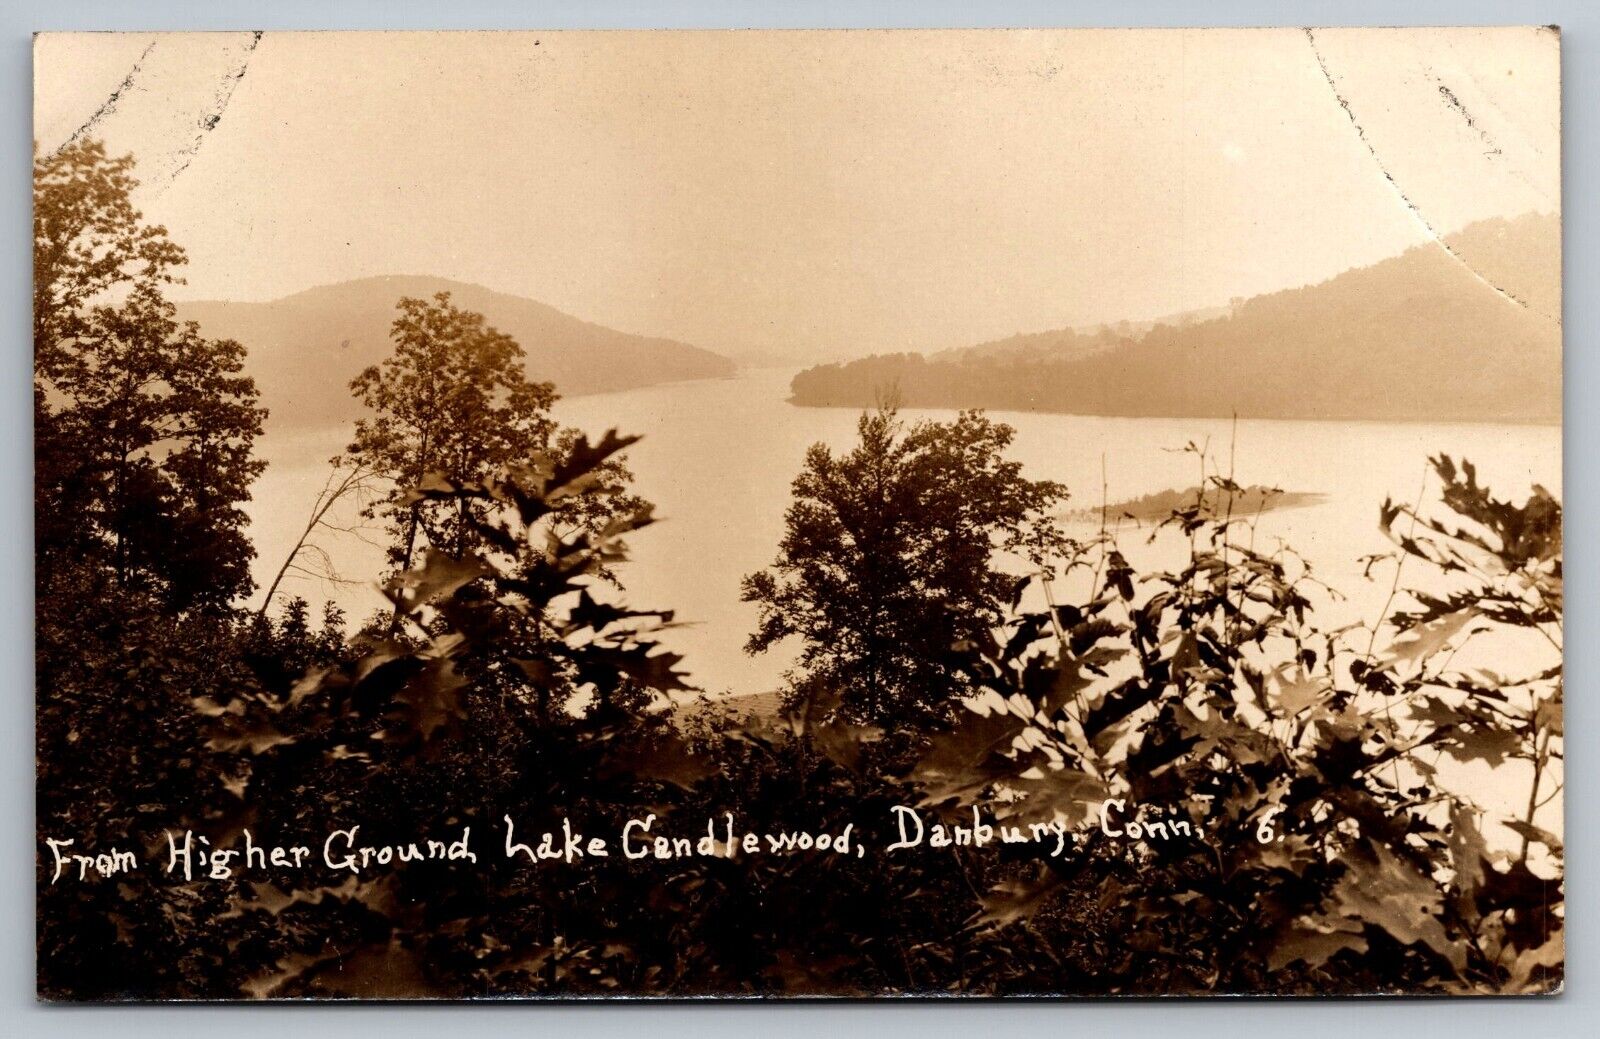 From Higher Ground. Lake Candlewood. Danbury CT Real Photo Postcard. RPPC